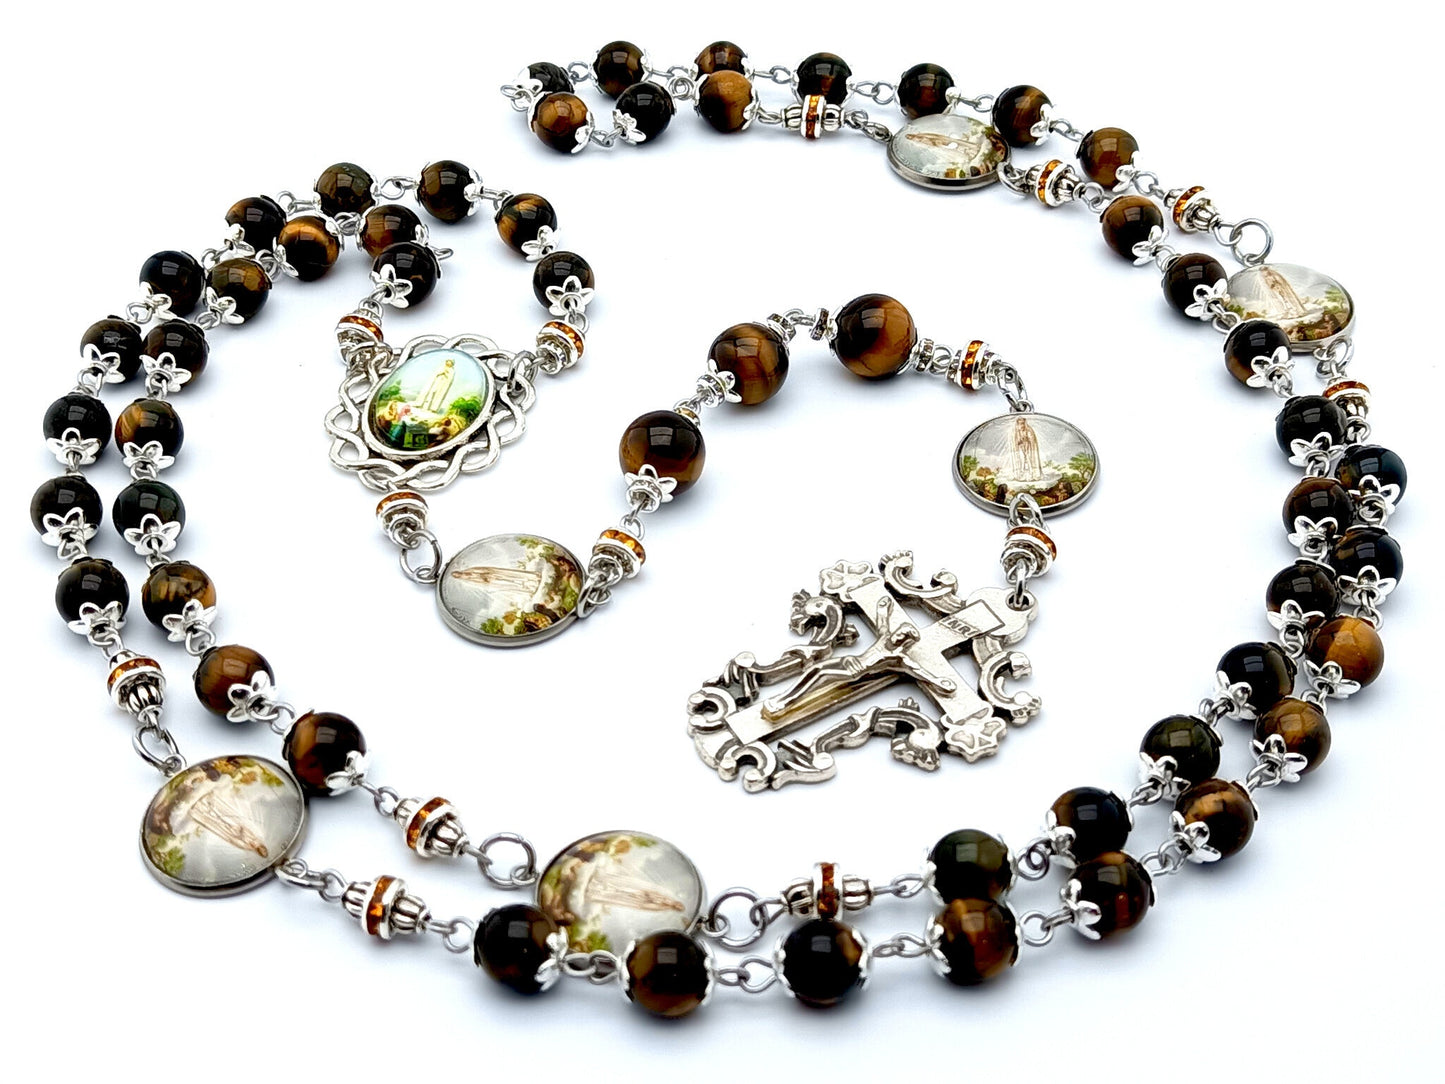 Our Lady of Fatima uniaue rosary beads with tigers eye gemstone and picture beads, filigree crucifix and picture centre medal.